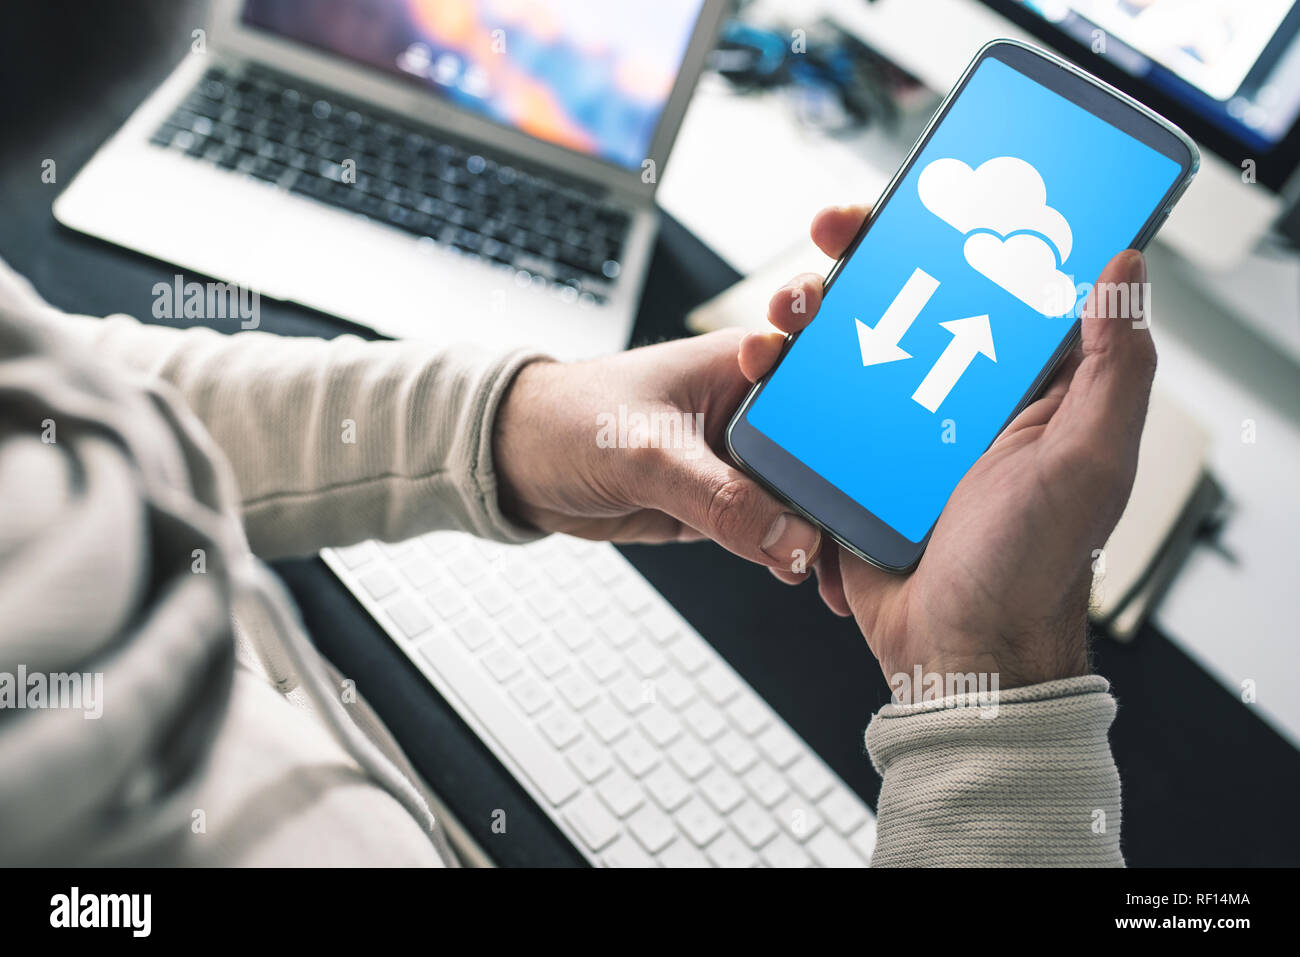 man sitting at office desk using cloud service on smartphone for data transfer and synchronization Stock Photo